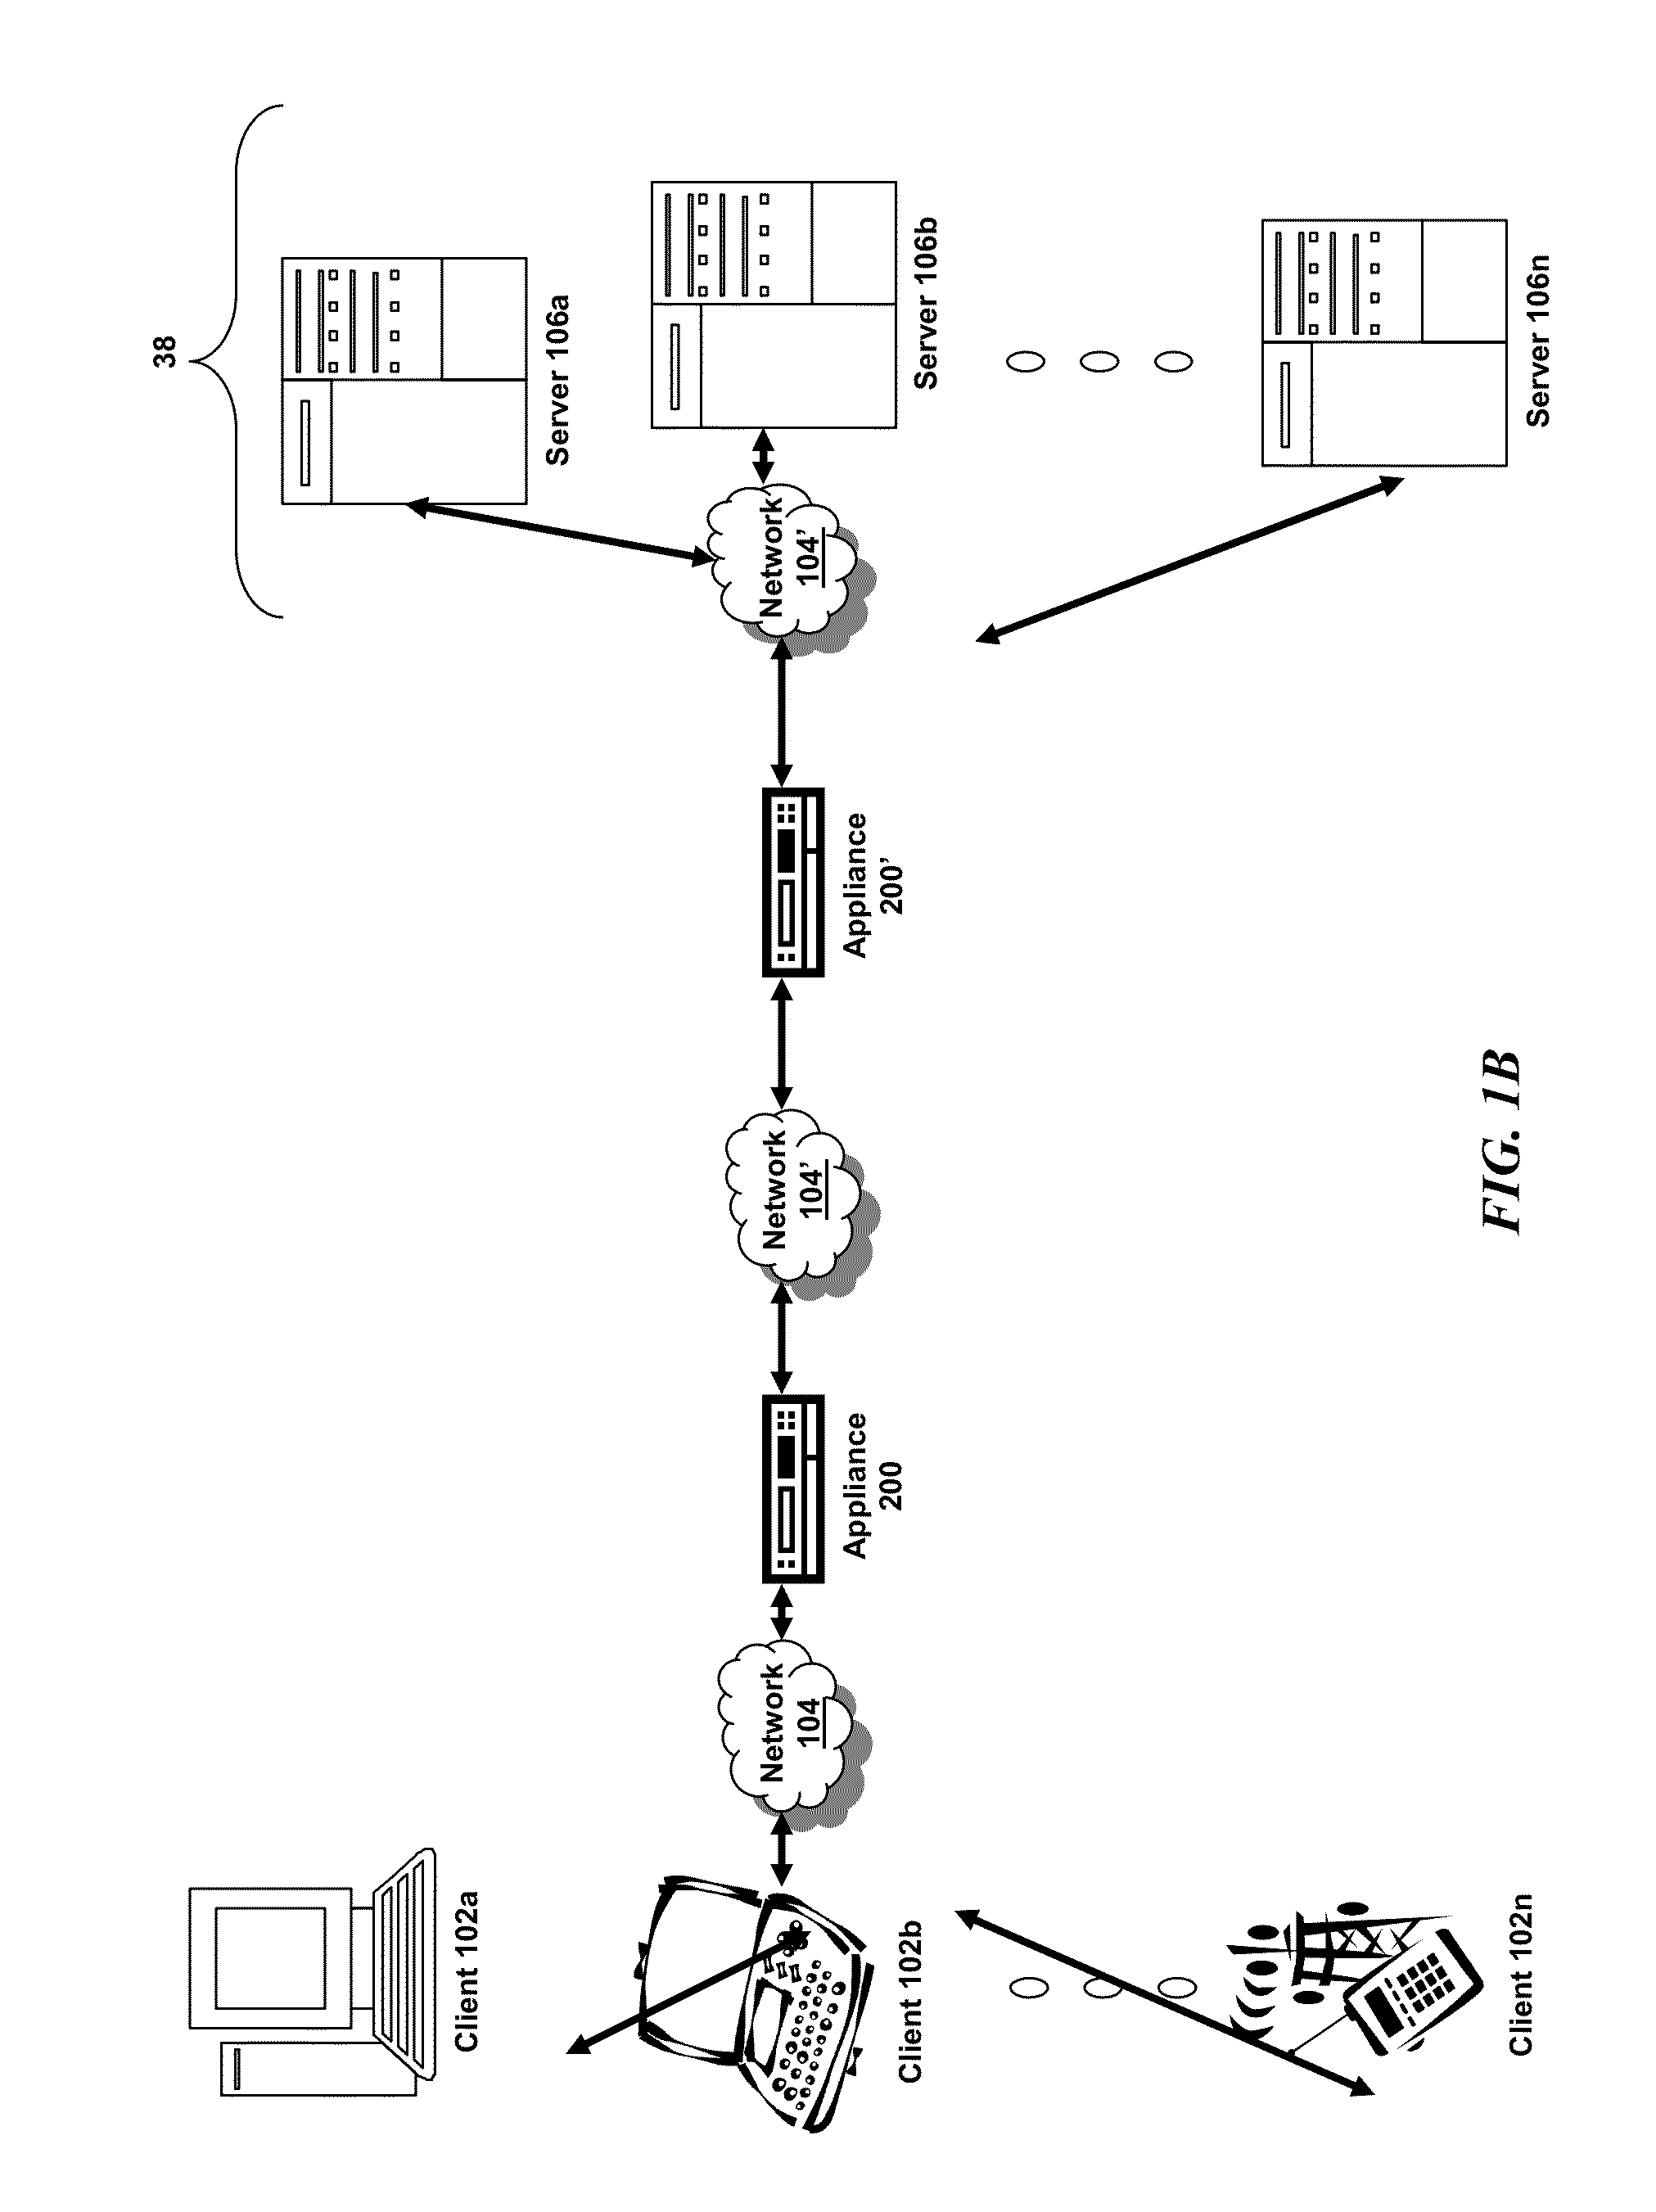 Systems and Methods for Tracking Application Layer Flow Via a Multi-Connection Intermediary Device